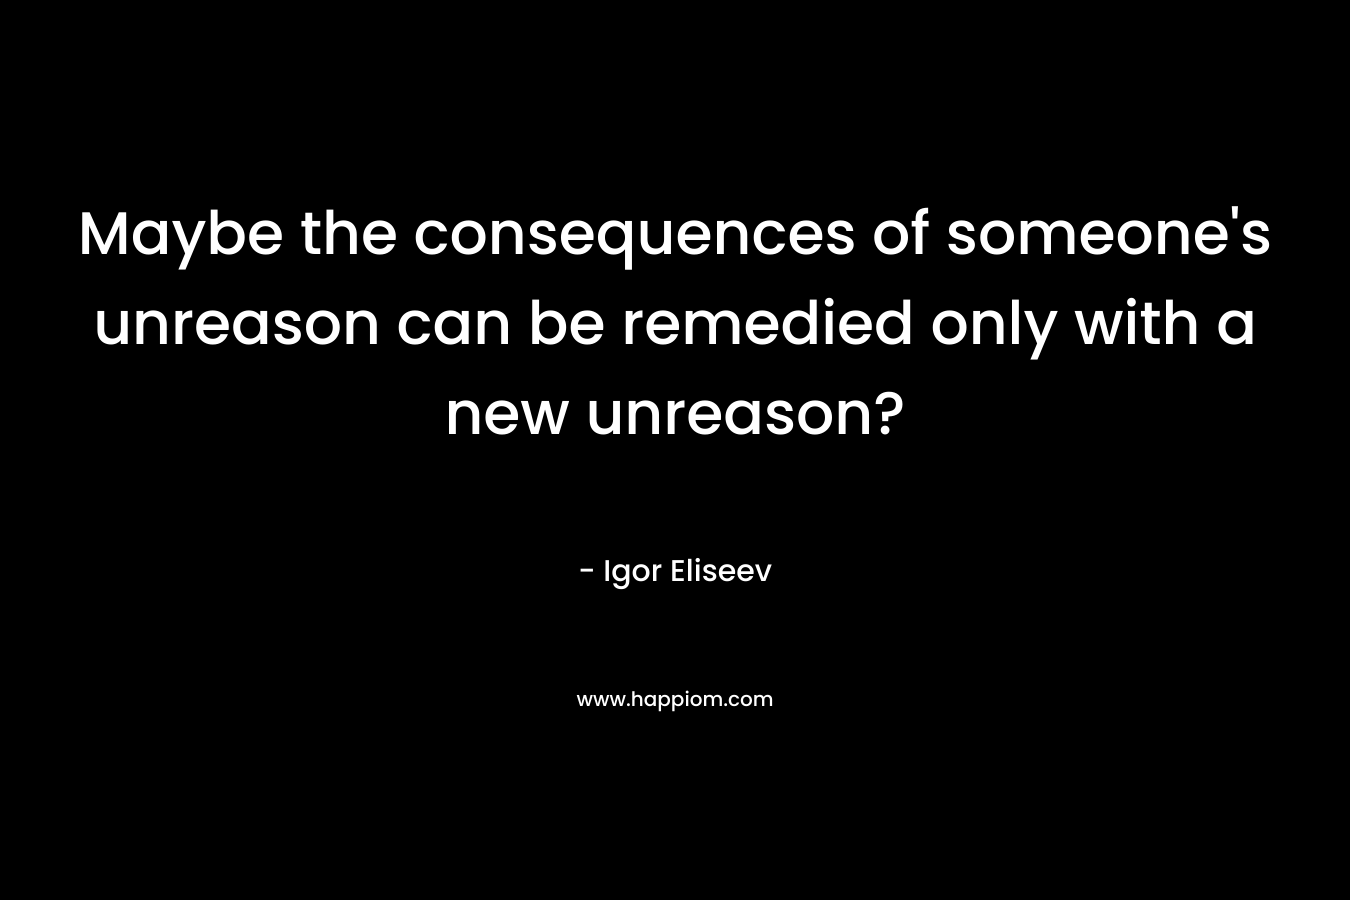 Maybe the consequences of someone's unreason can be remedied only with a new unreason?